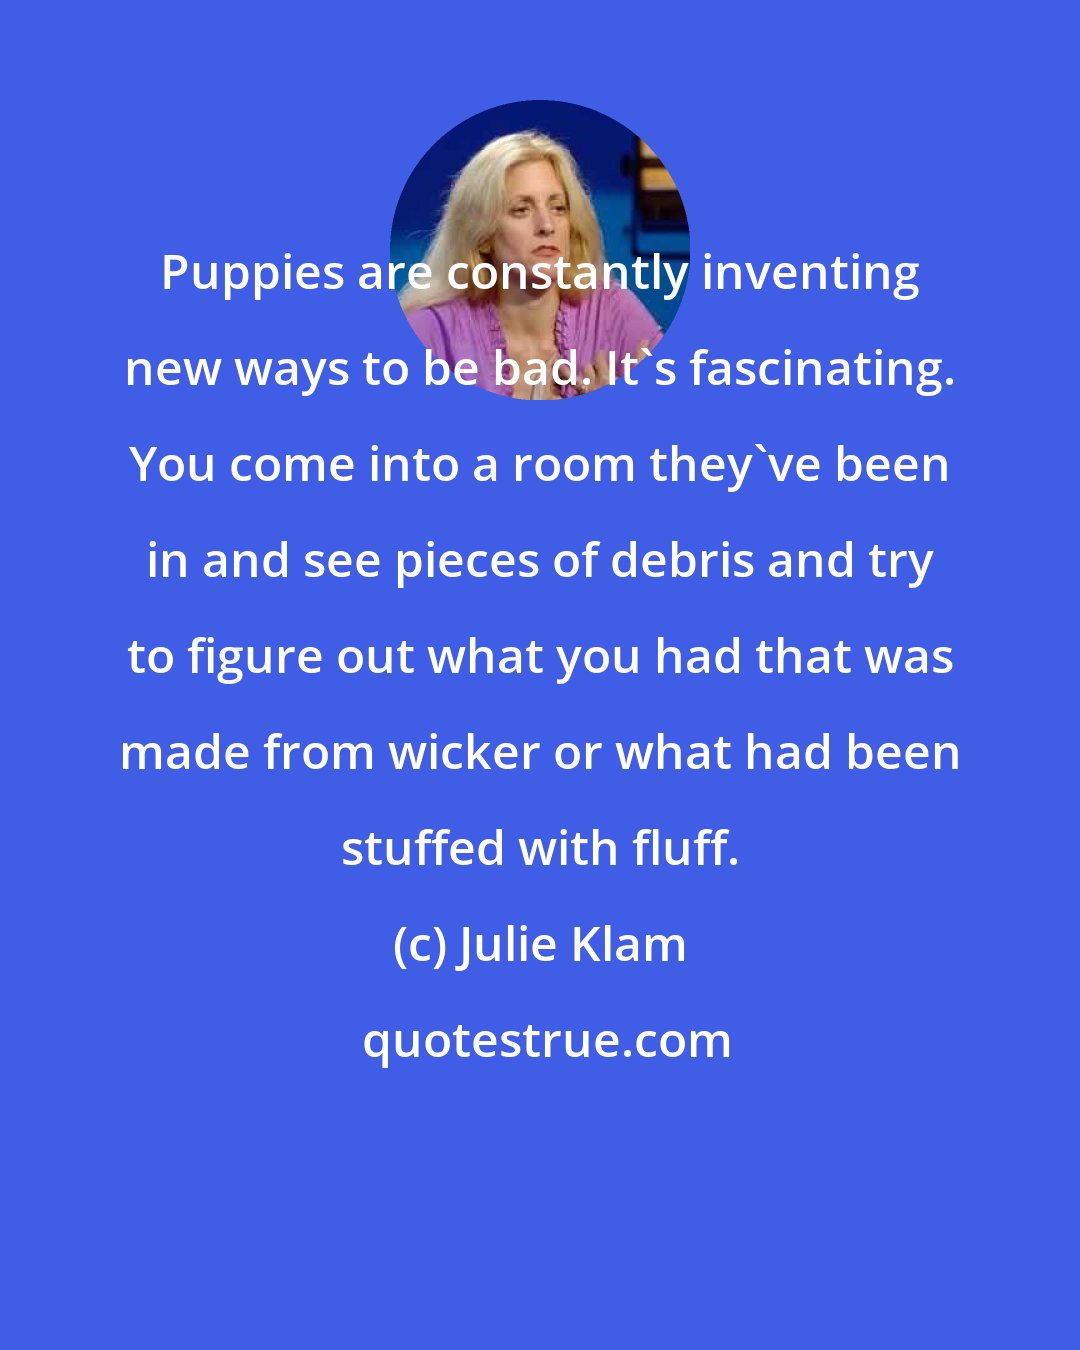 Julie Klam: Puppies are constantly inventing new ways to be bad. It's fascinating. You come into a room they've been in and see pieces of debris and try to figure out what you had that was made from wicker or what had been stuffed with fluff.